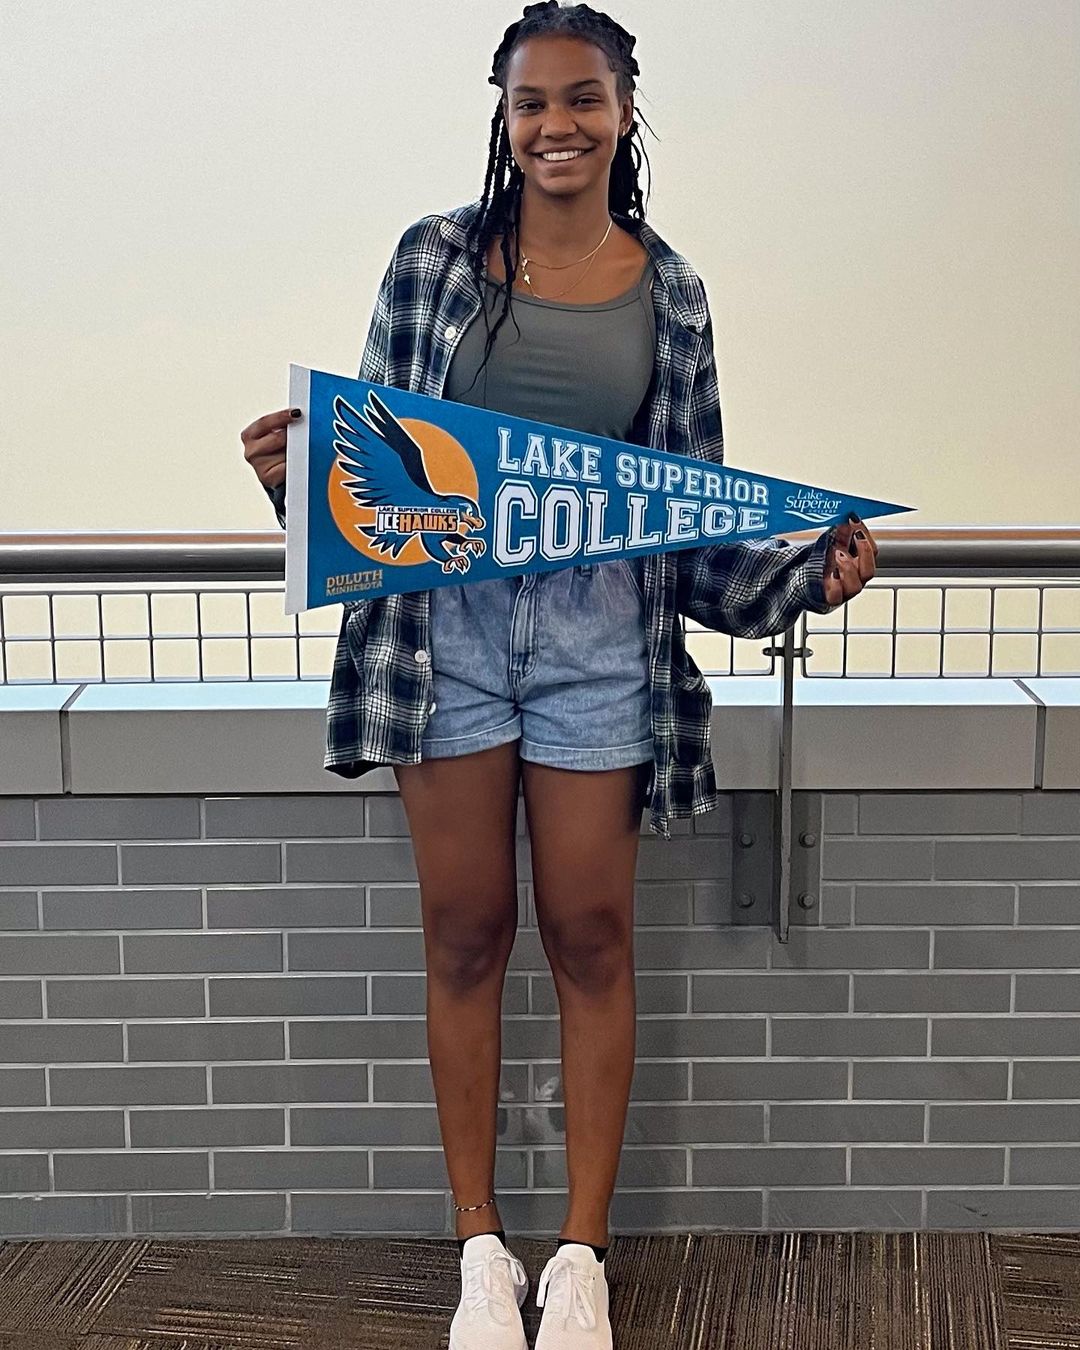 Welcome to Lake Superior College! Letisha is excited to start at LSC this fall for the Biology Transfer Pathway, meaning...